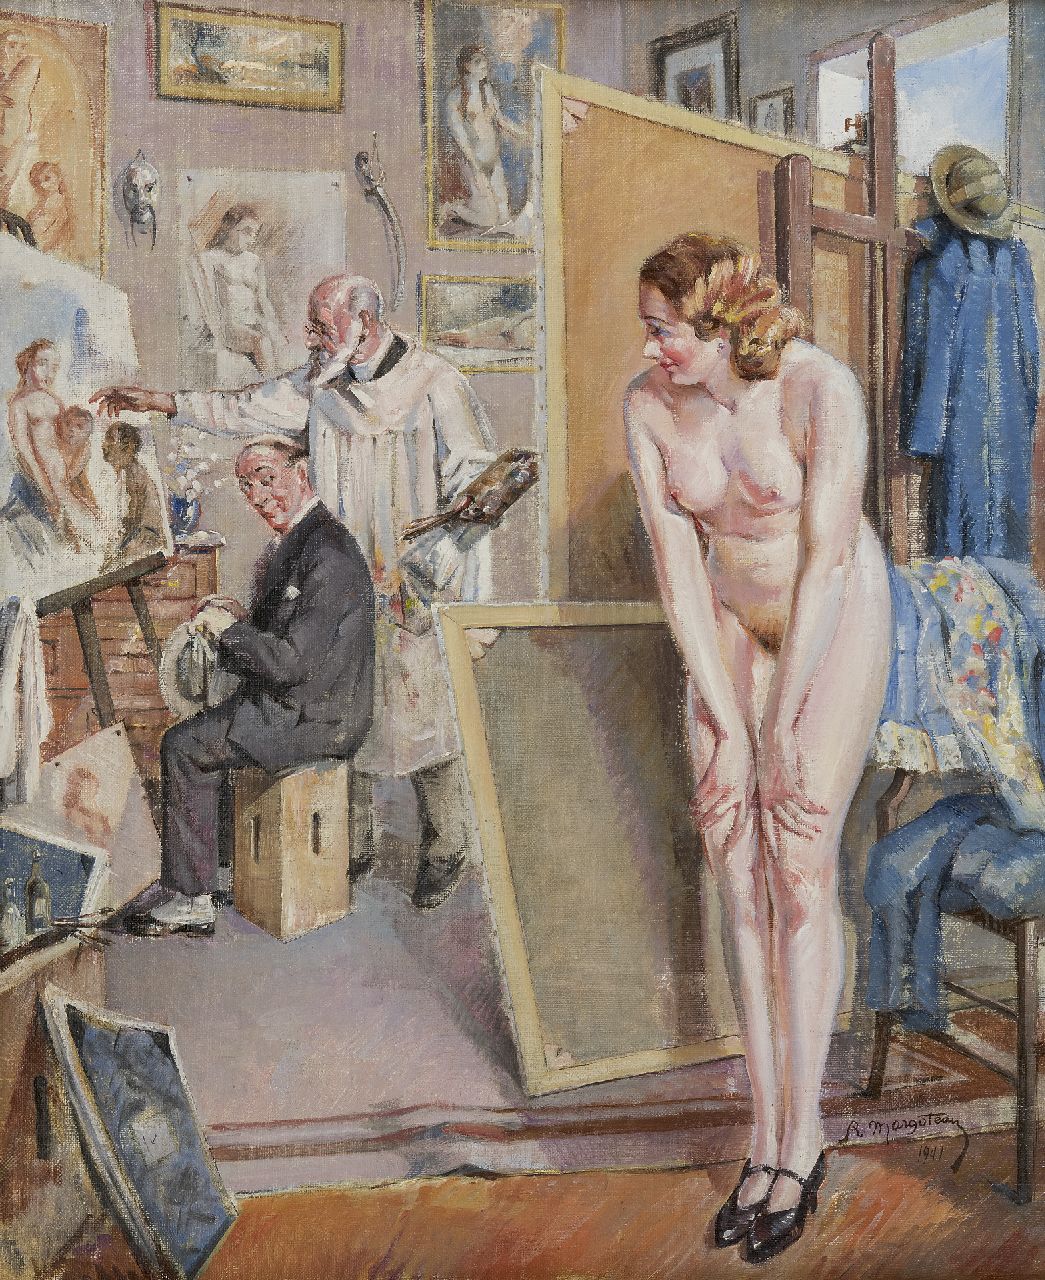 Margoteau R.P.  | René Pierre Margoteau, The artist's favorite model, oil on canvas 60.2 x 50.1 cm, signed l.r. and dated 1941